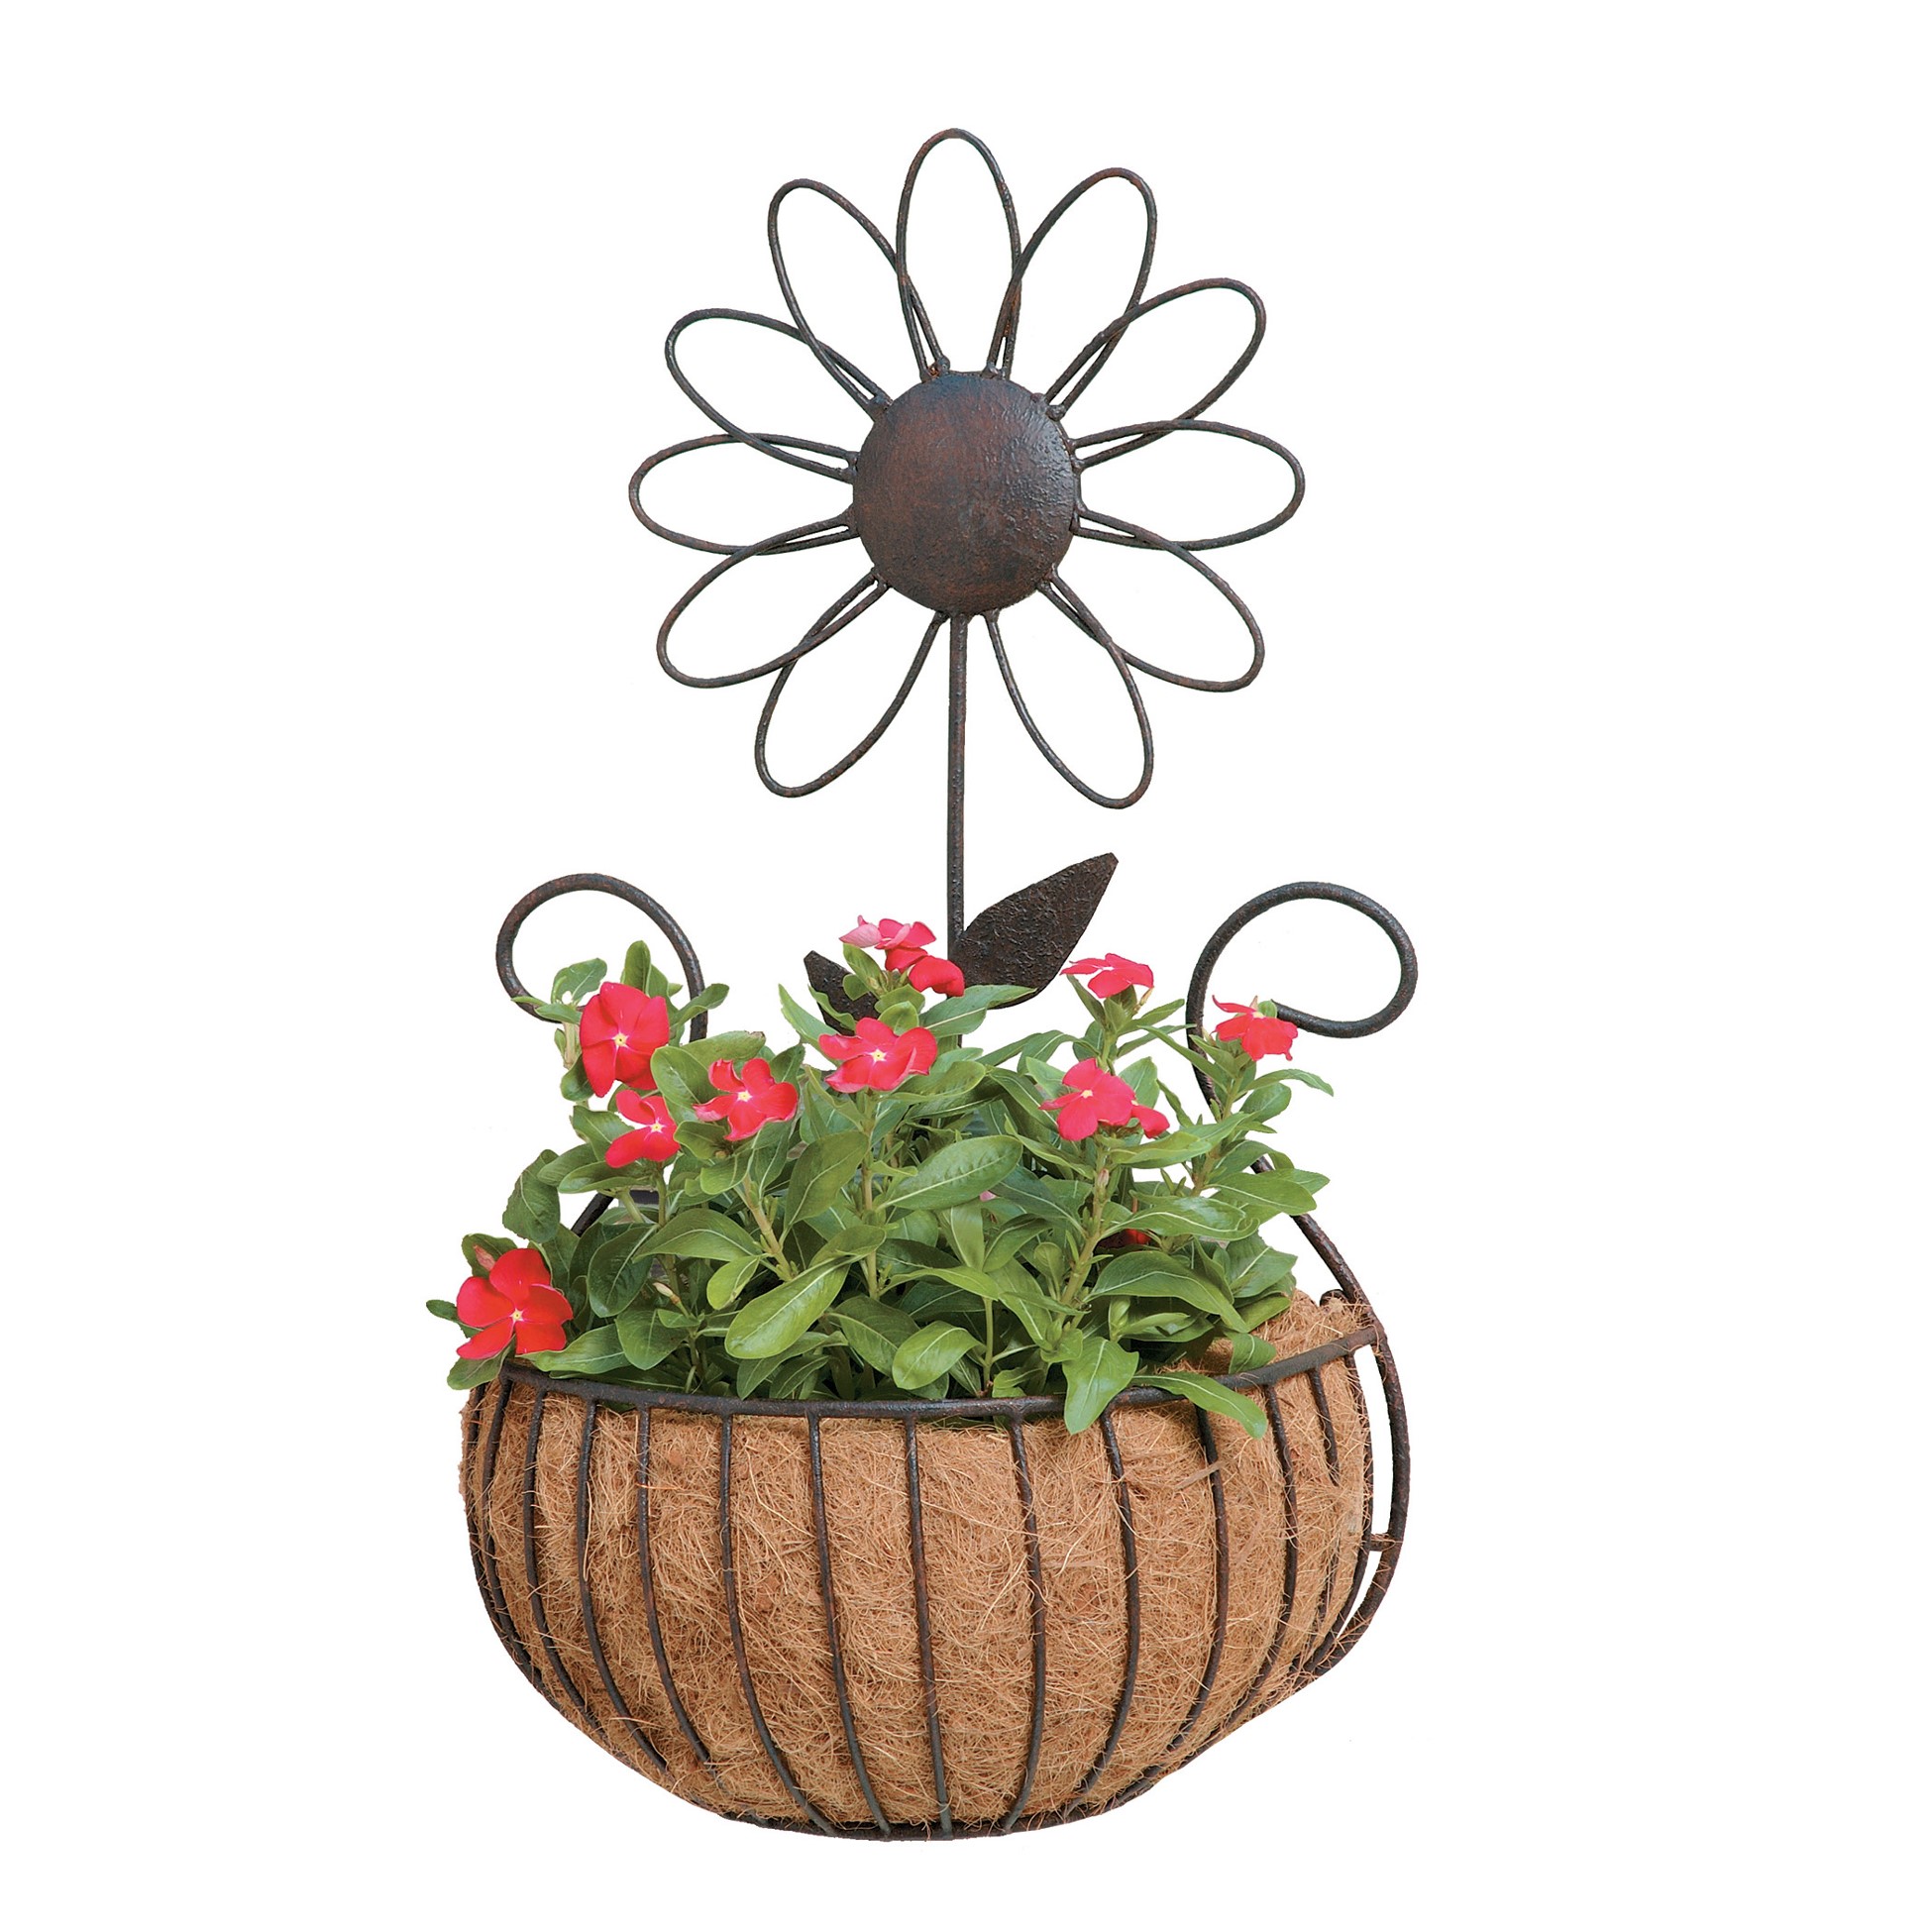 Deer Park Ironworks Daisy Wall Basket w/ Coco Liner